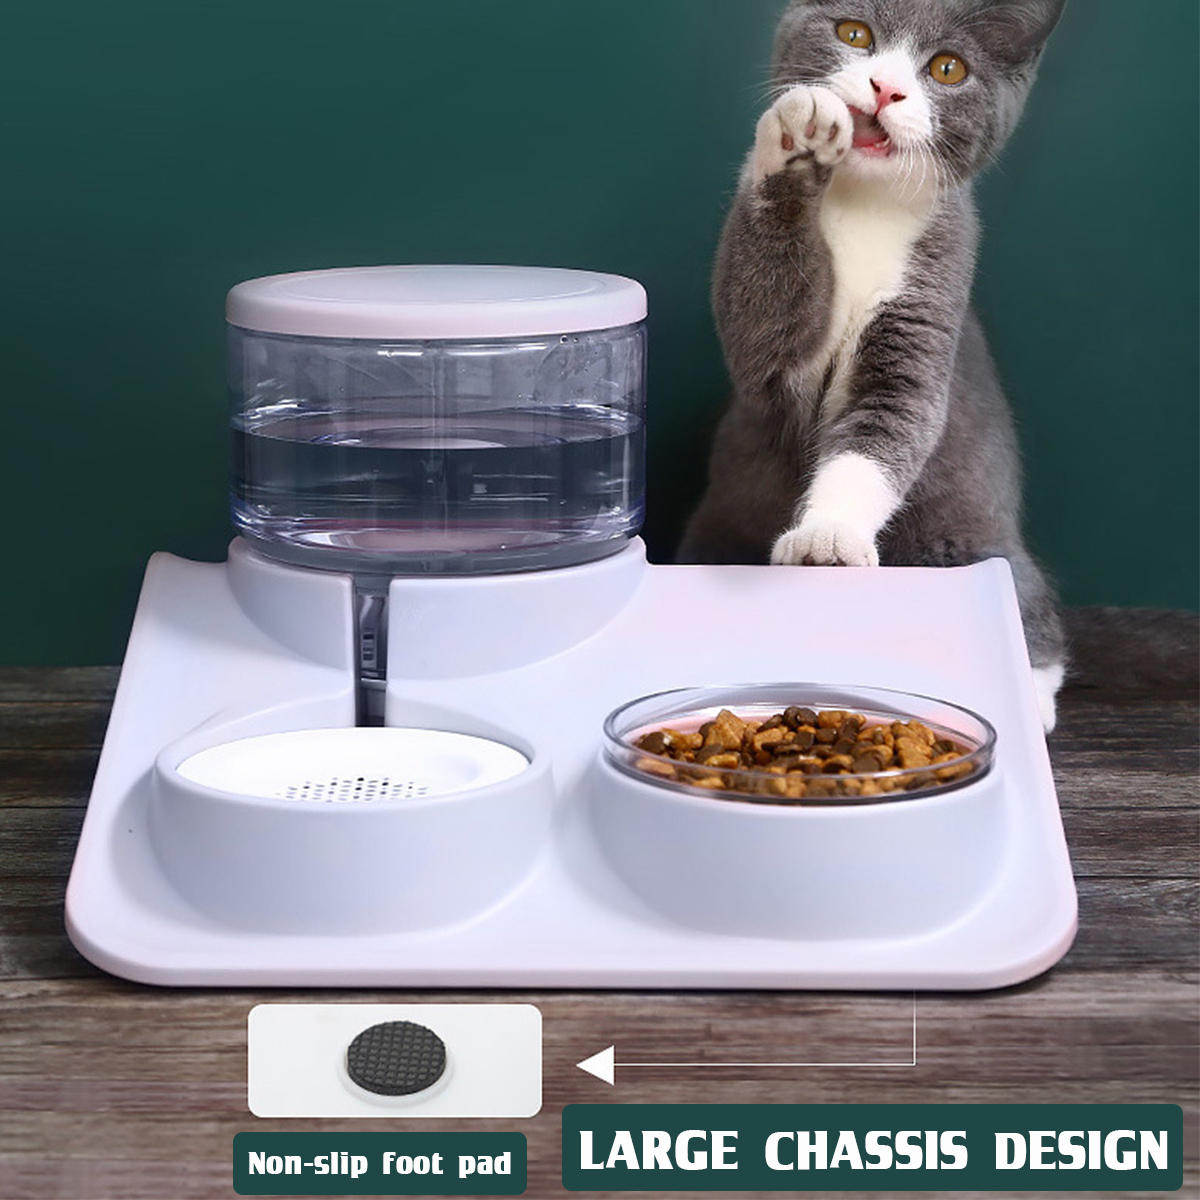 Pet-Waterer-Multi-Layer-Filter-Sealed-Cat-Bowl-2L-Pet-Bowl-for-Automatic-Cat-Drinking-and-Feeding-De-1912352-10